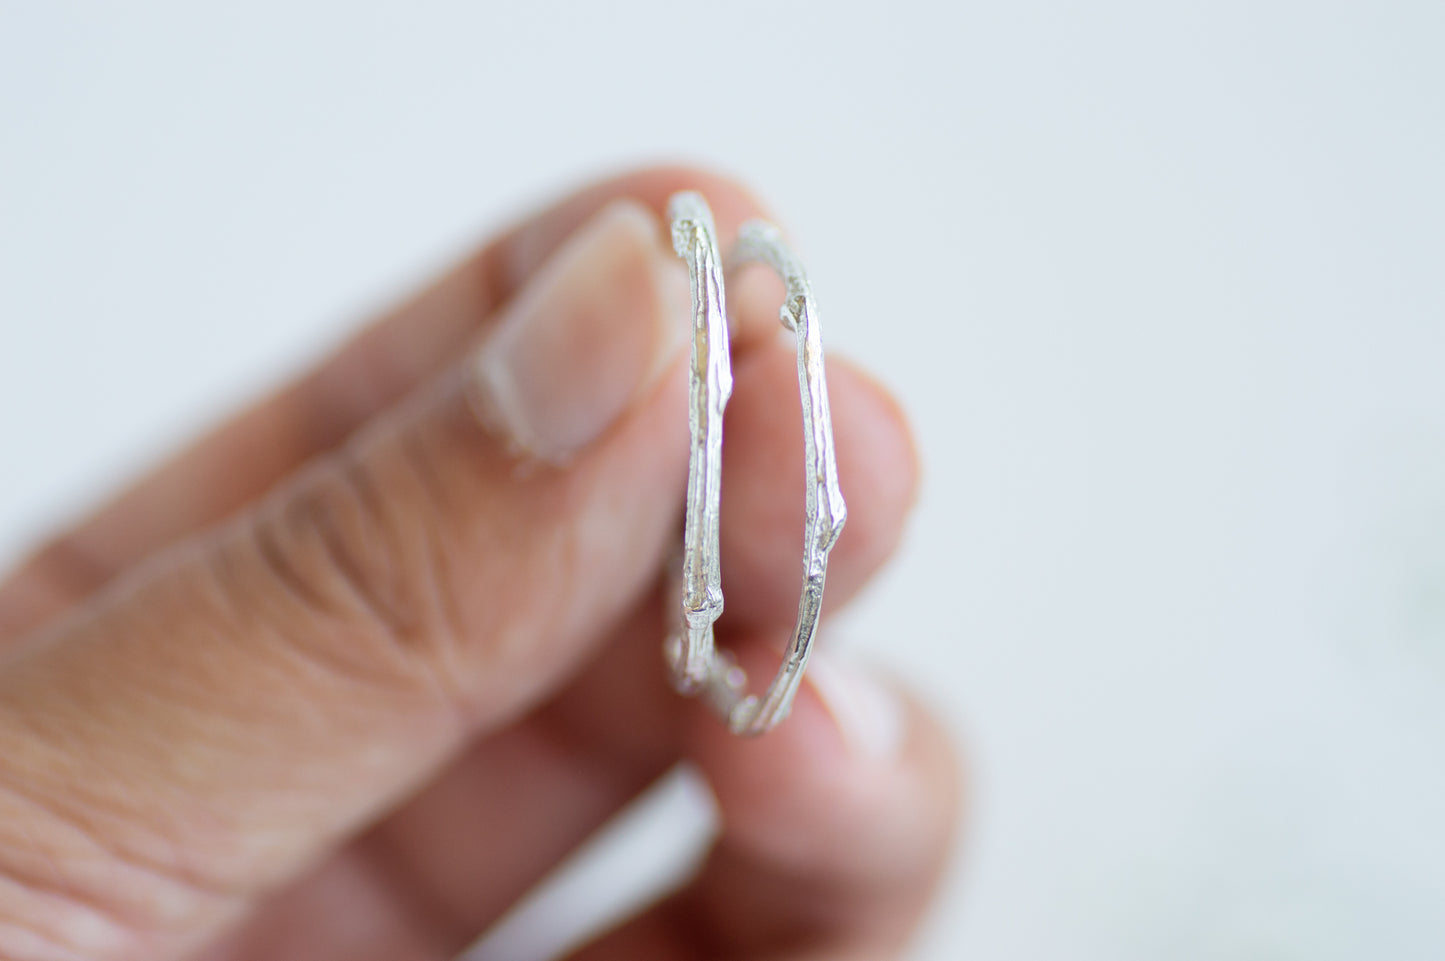 Silver 'Hedgewitch' Hoops